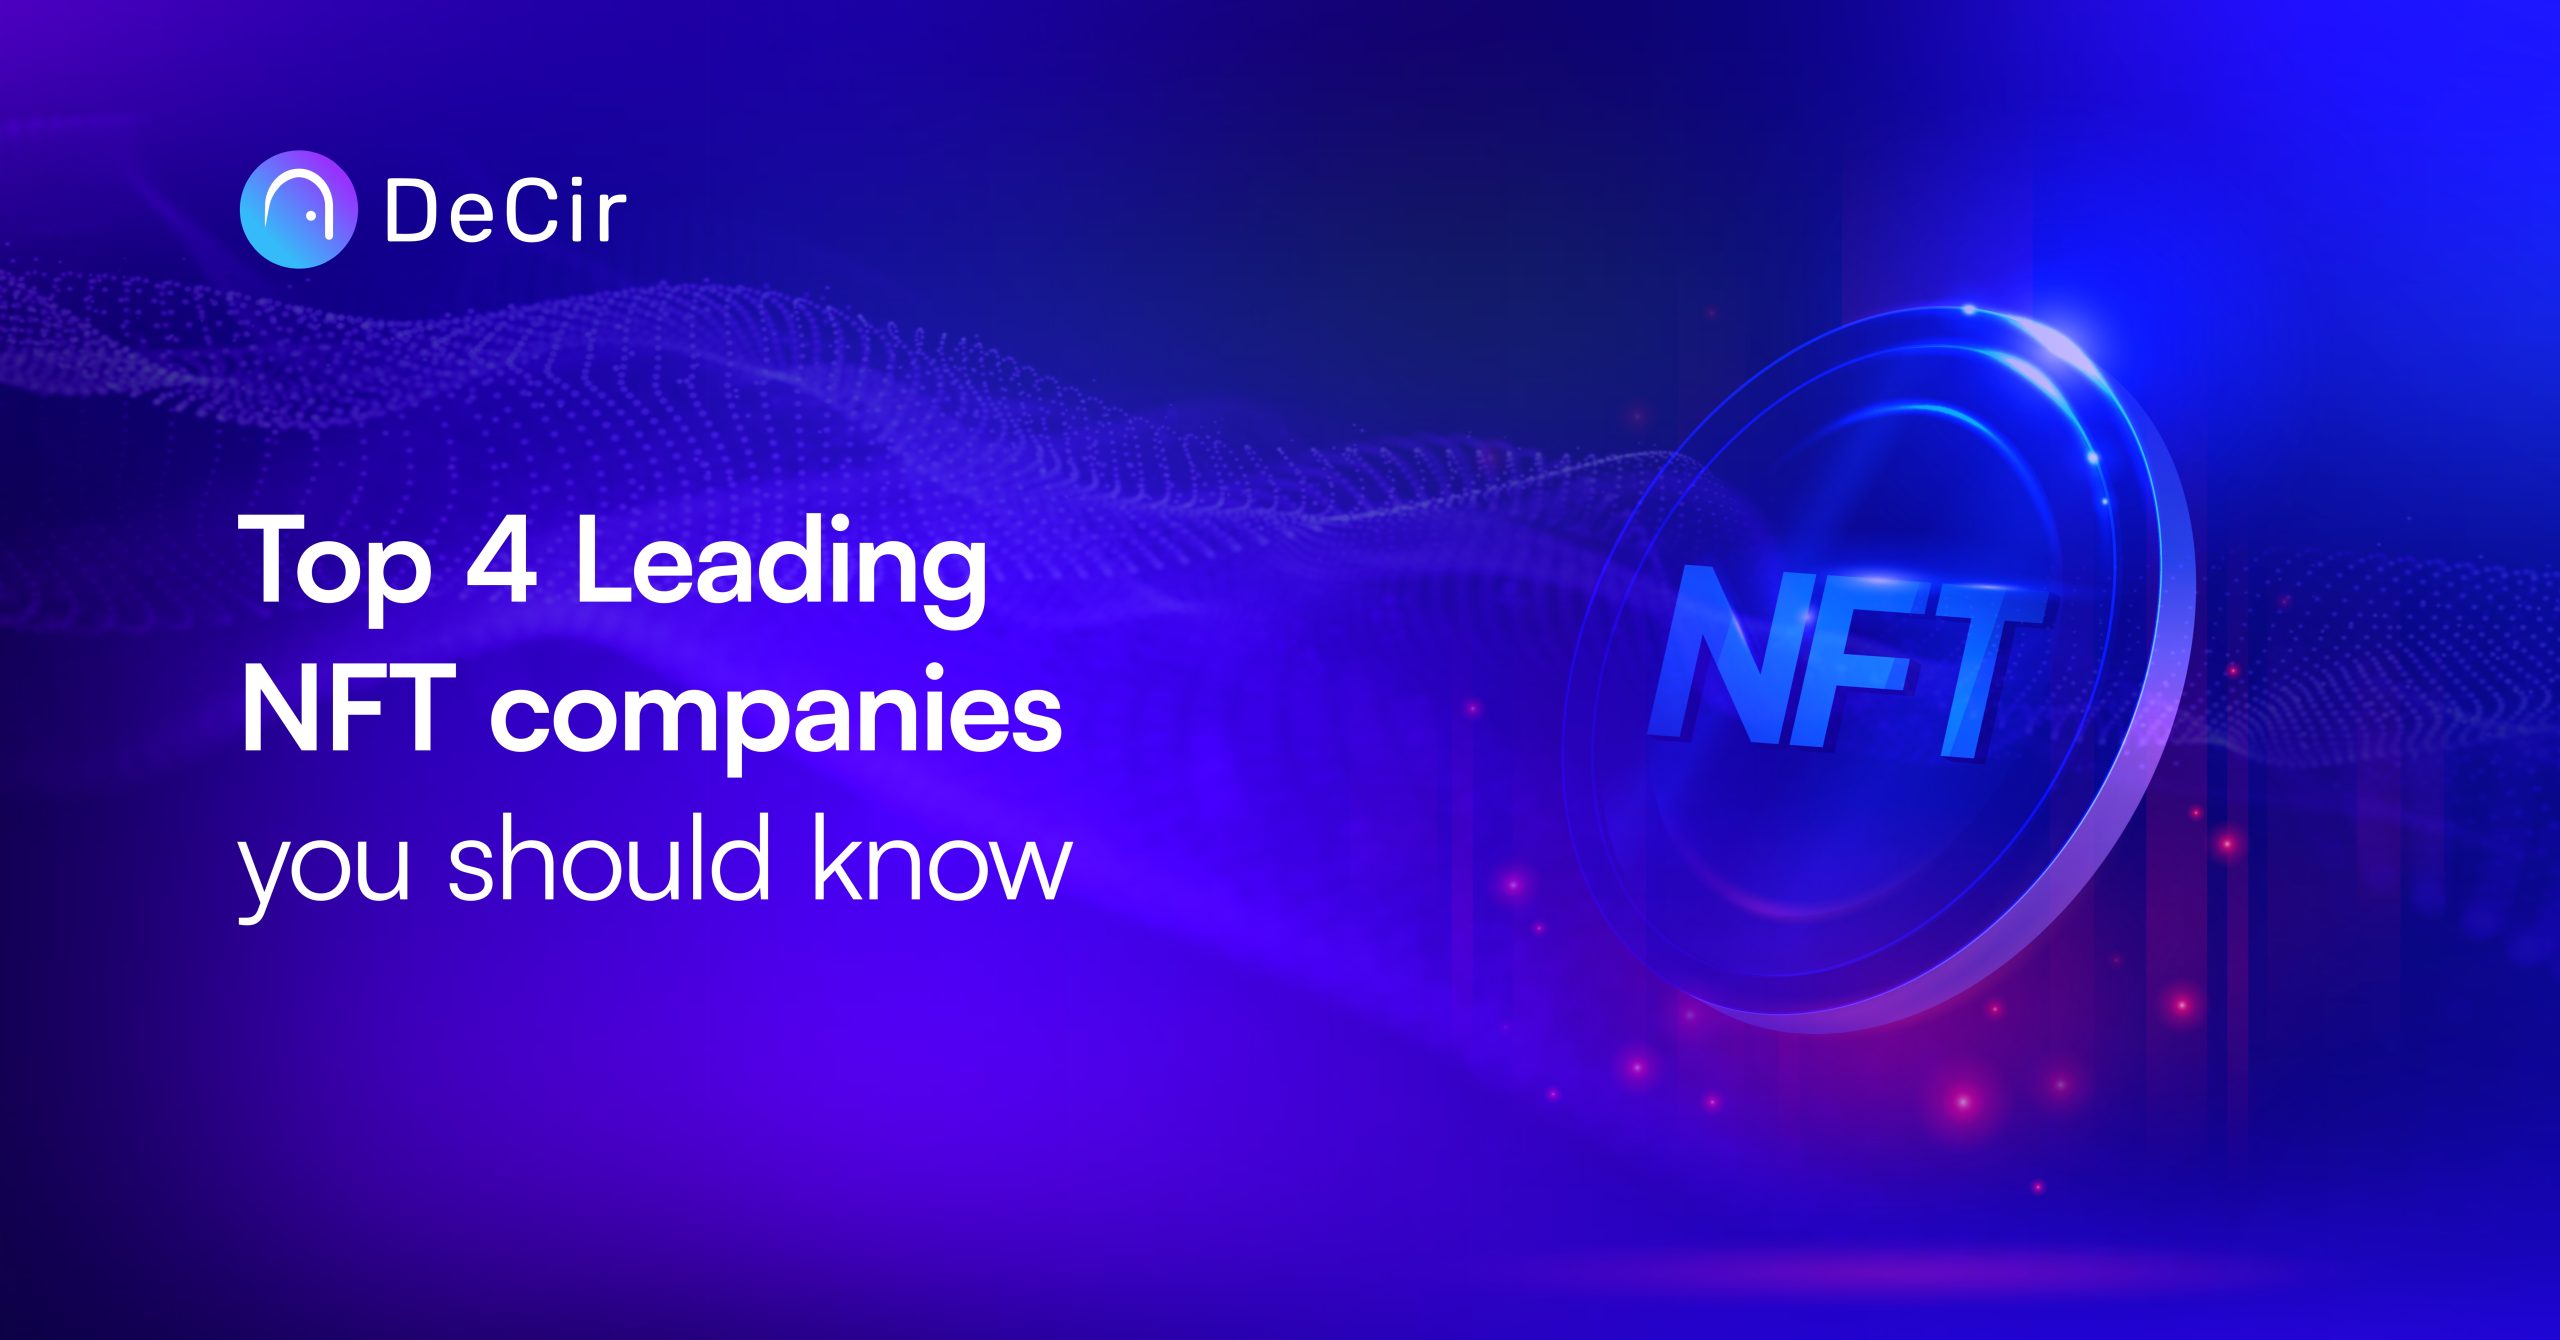 Top 4 leading NFT companies you should know